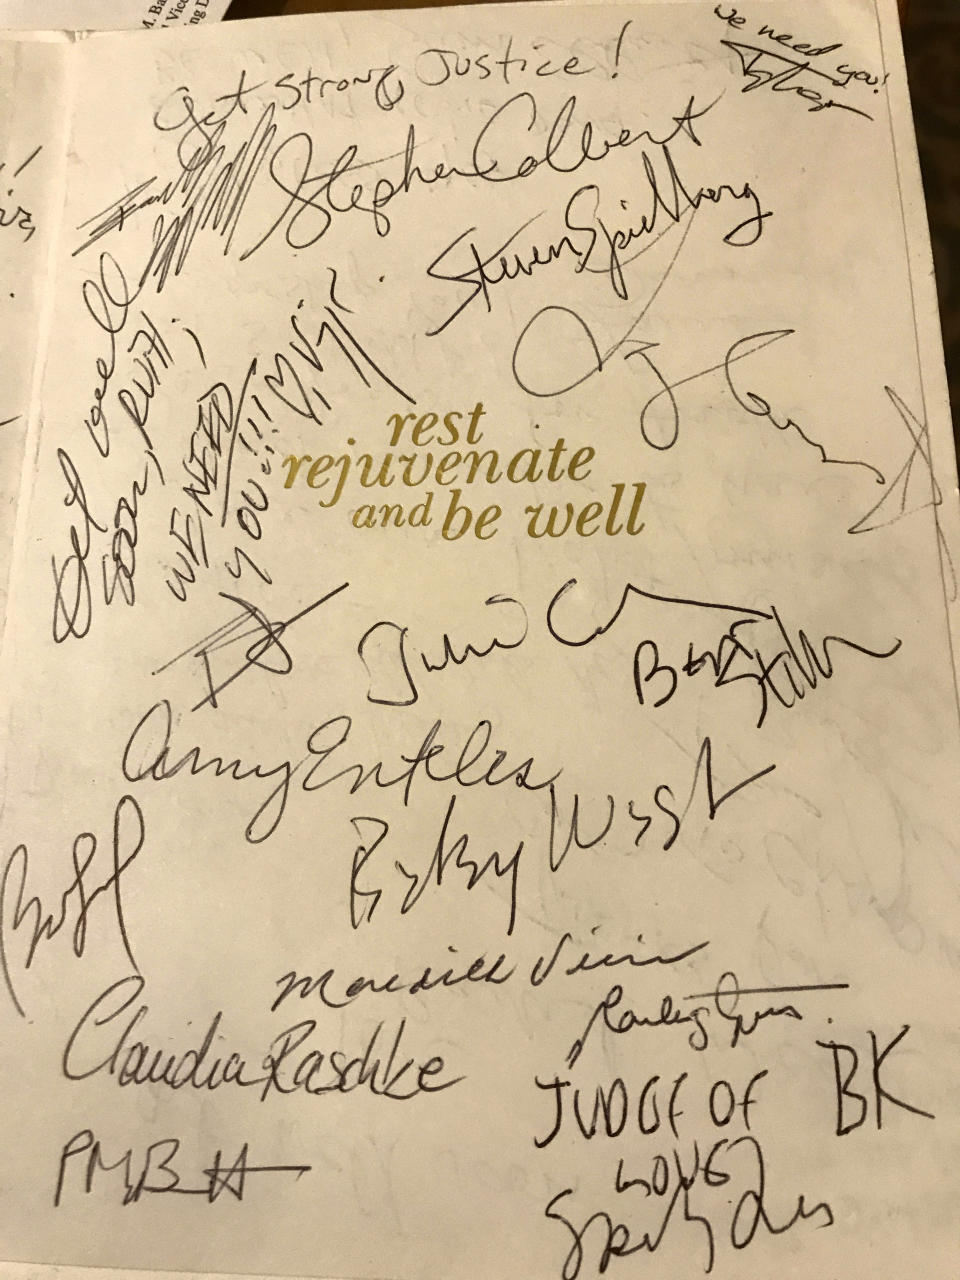 This image released by Magnolia Pictures shows celebrity signatures on a get well card meant for U.S. Supreme Court Justice Ruth Bader Ginsburg. Filmmakers from the Oscar nominated "RBG" film have been collecting signatures and get-well notes from Hollywood A-listers for Ginsburg, who is recovering from lung cancer surgery. (Magnolia Pictures via AP)